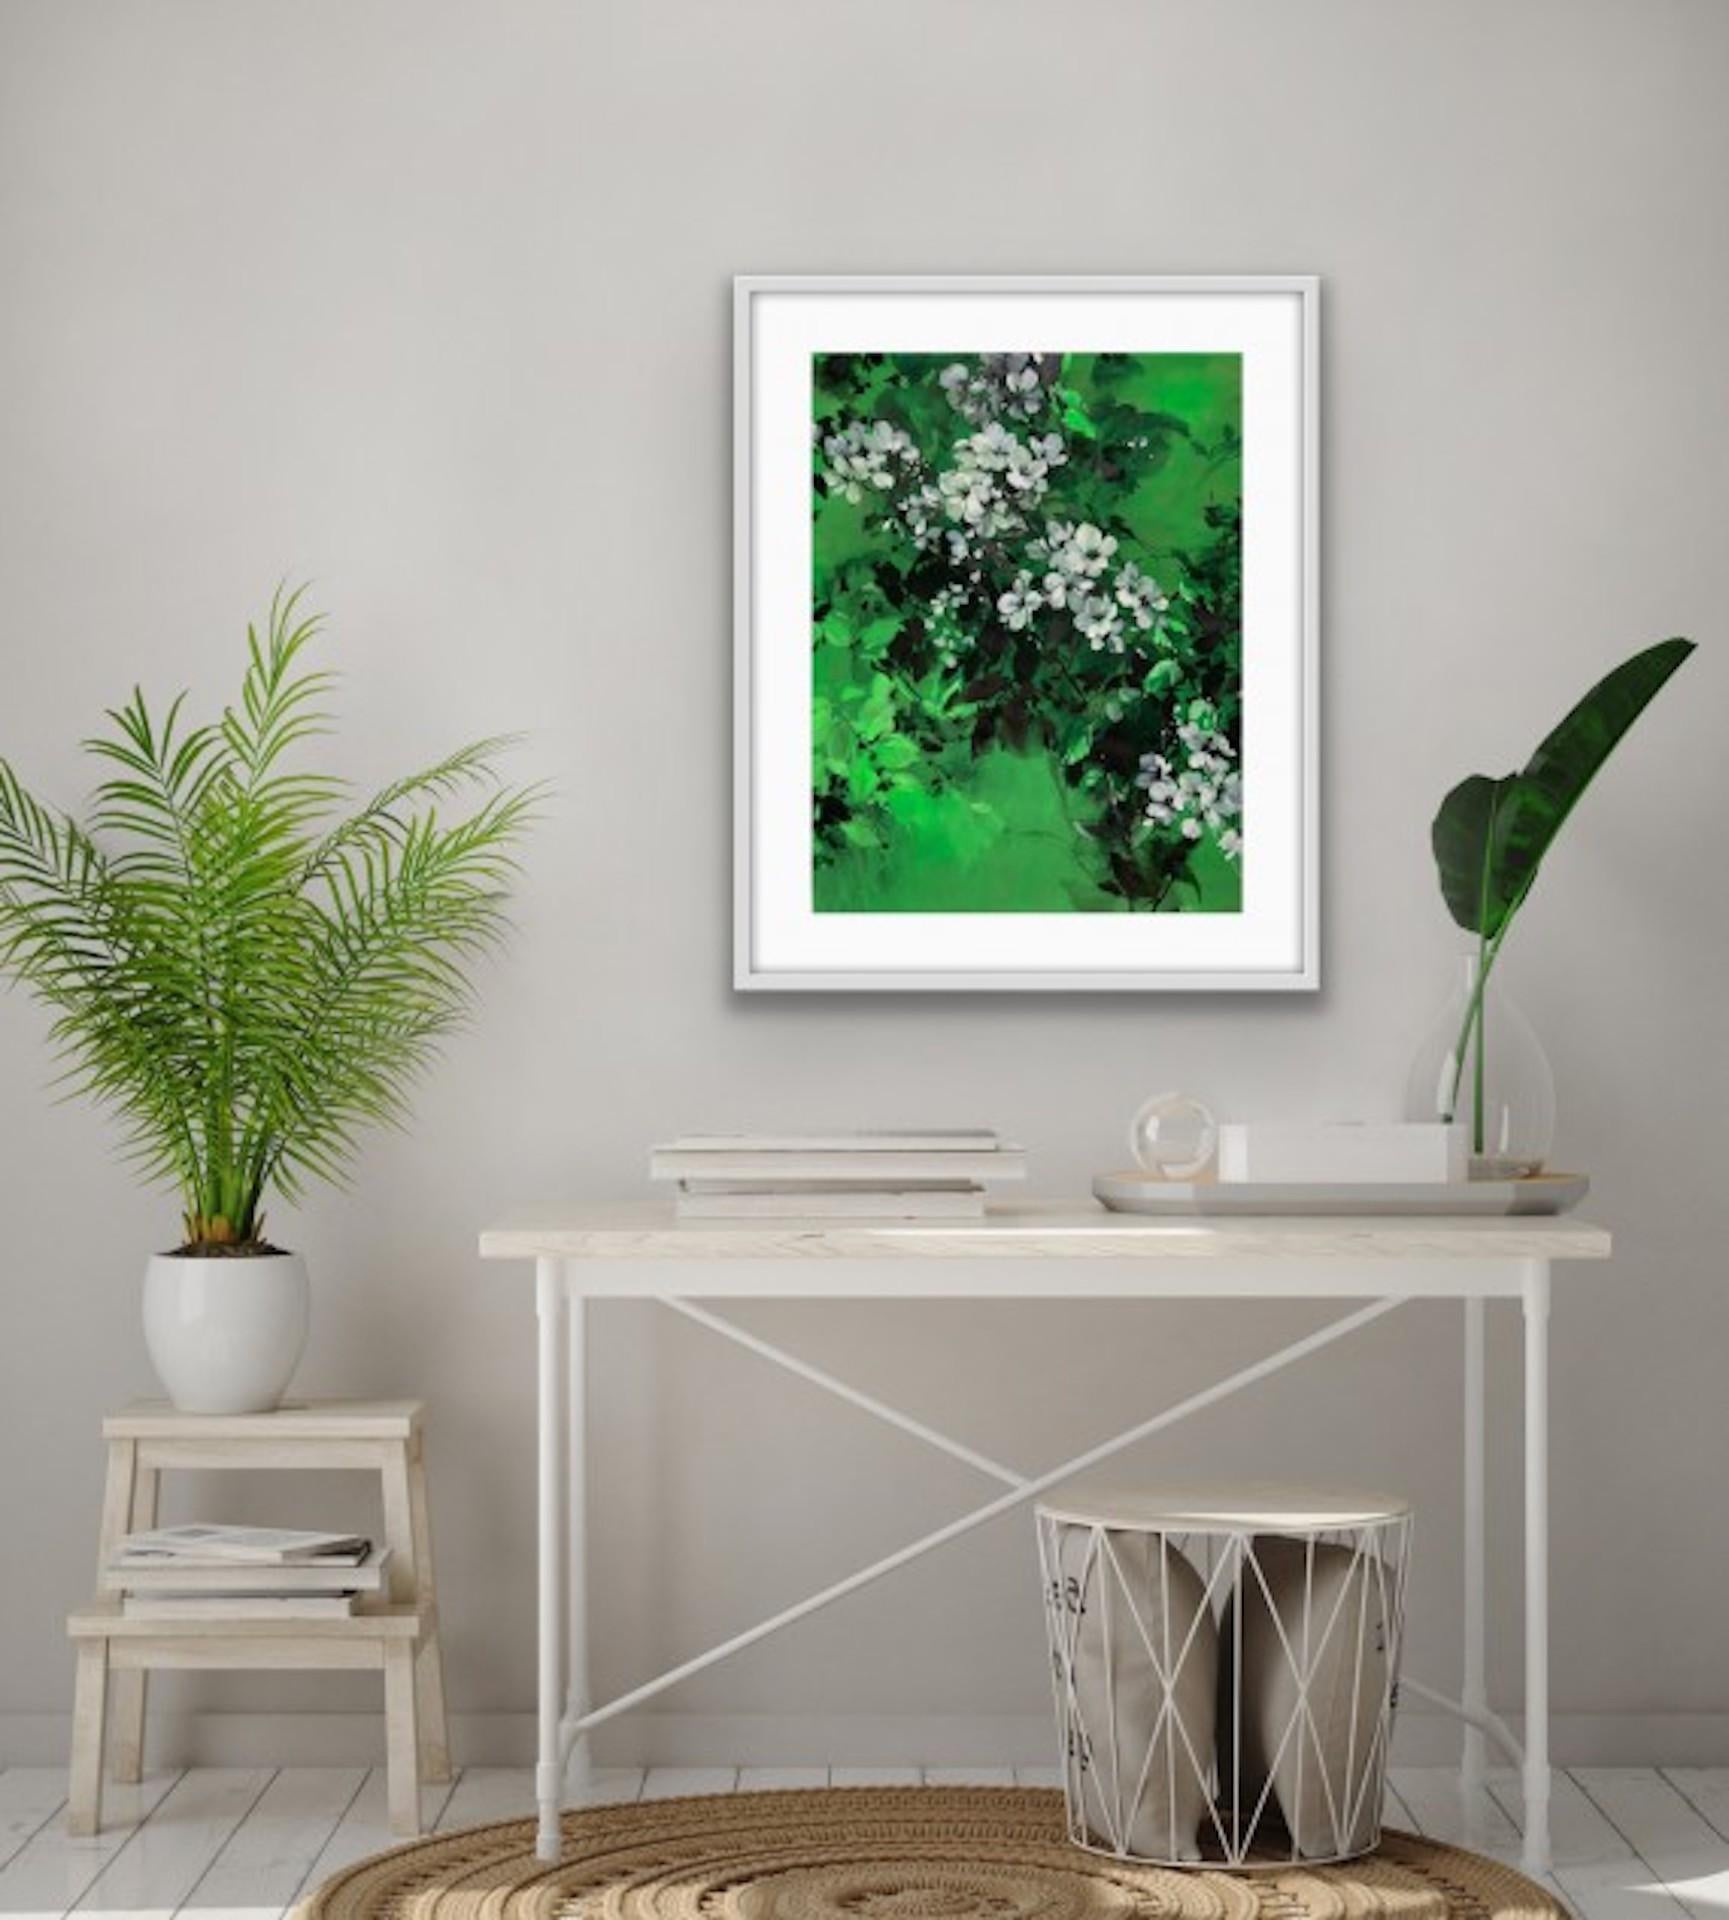 Delight in Green [2021]
Original
Flowers
Watercolour, gouache and gesso
Image size: H:69 cm x W:53 cm
Paper size: H:72 cm x W:56 cm x D:0.001cm
Sold Unframed
Please note that insitu images are purely an indication of how a piece may look

Delight in